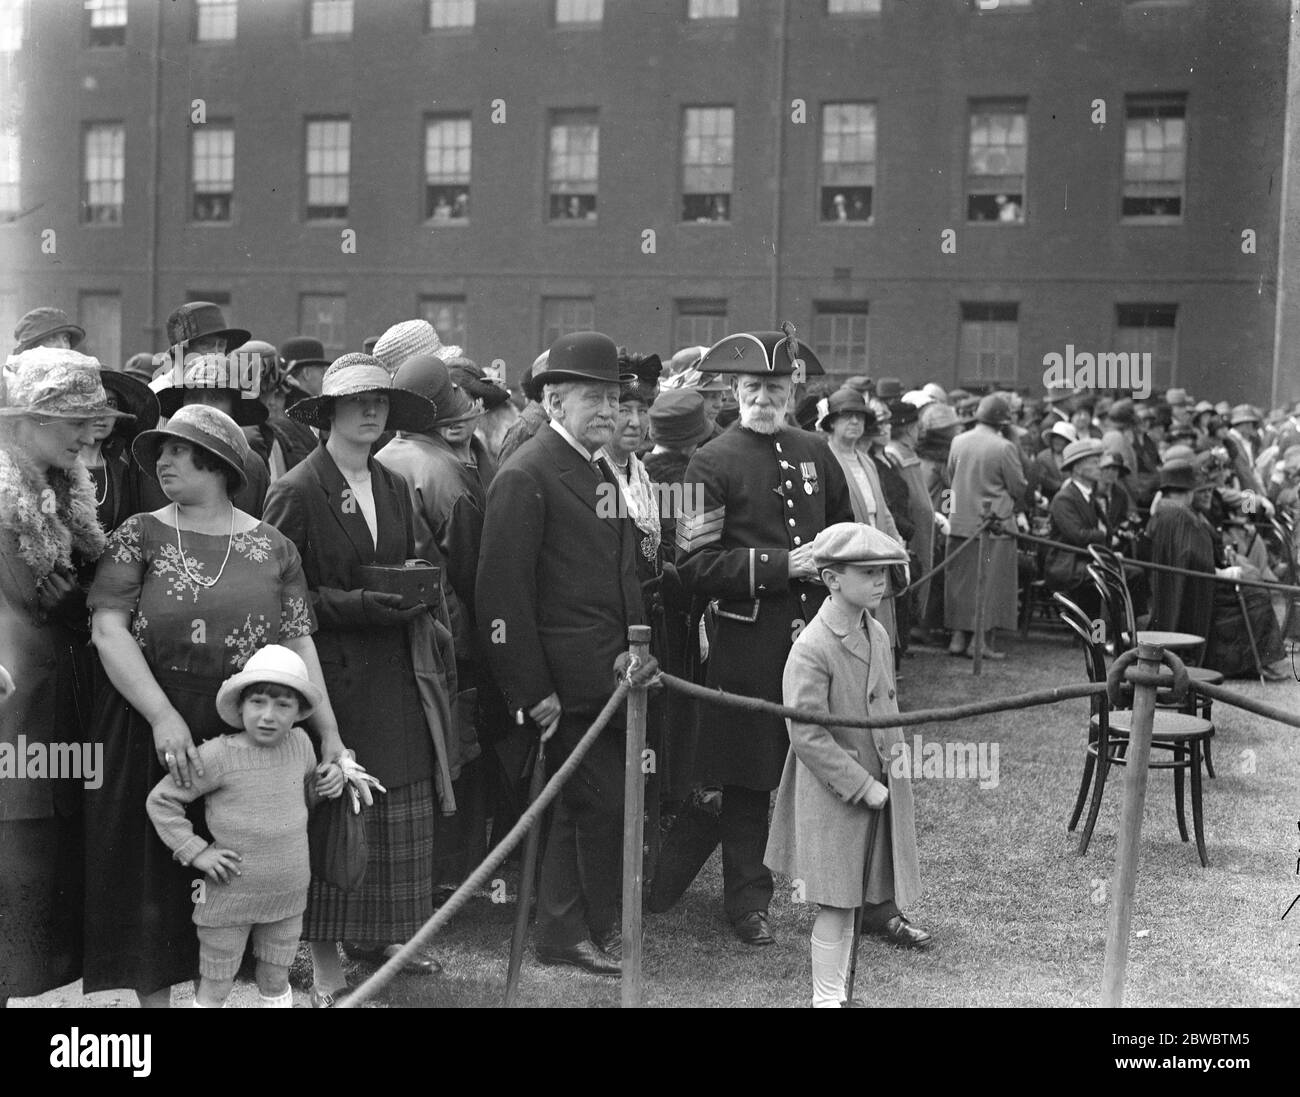 Oak apple day inspection at Royal Chelsea Hospital . Lt General Sir William Pulteney Pulteney , KCB , carried out the Oak Apple Day Inspection at the Royal Chelsea Hospital . The Earl of Southwark in the enclosure with a veteran . 30 May 1924 Stock Photo